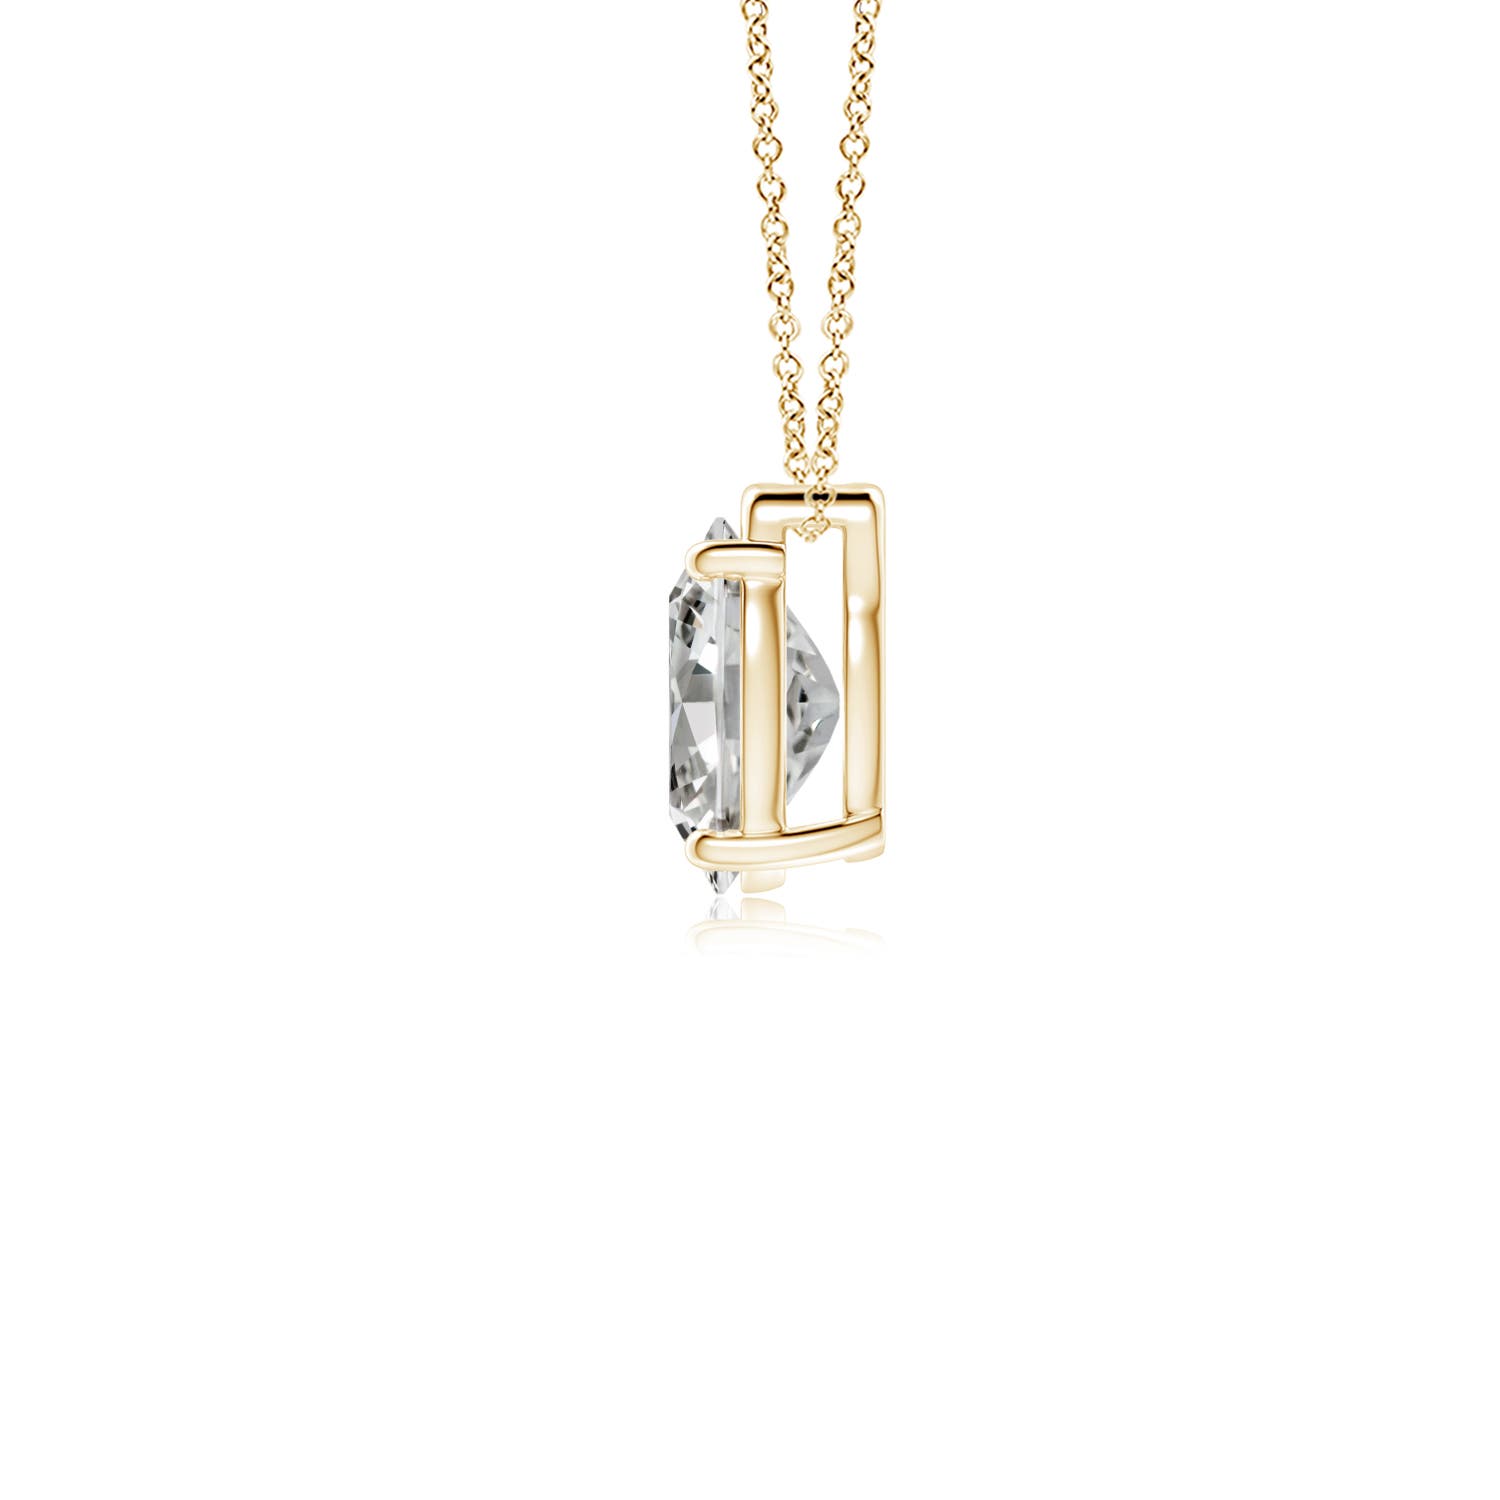 K, I3 / 1 CT / 18 KT Yellow Gold